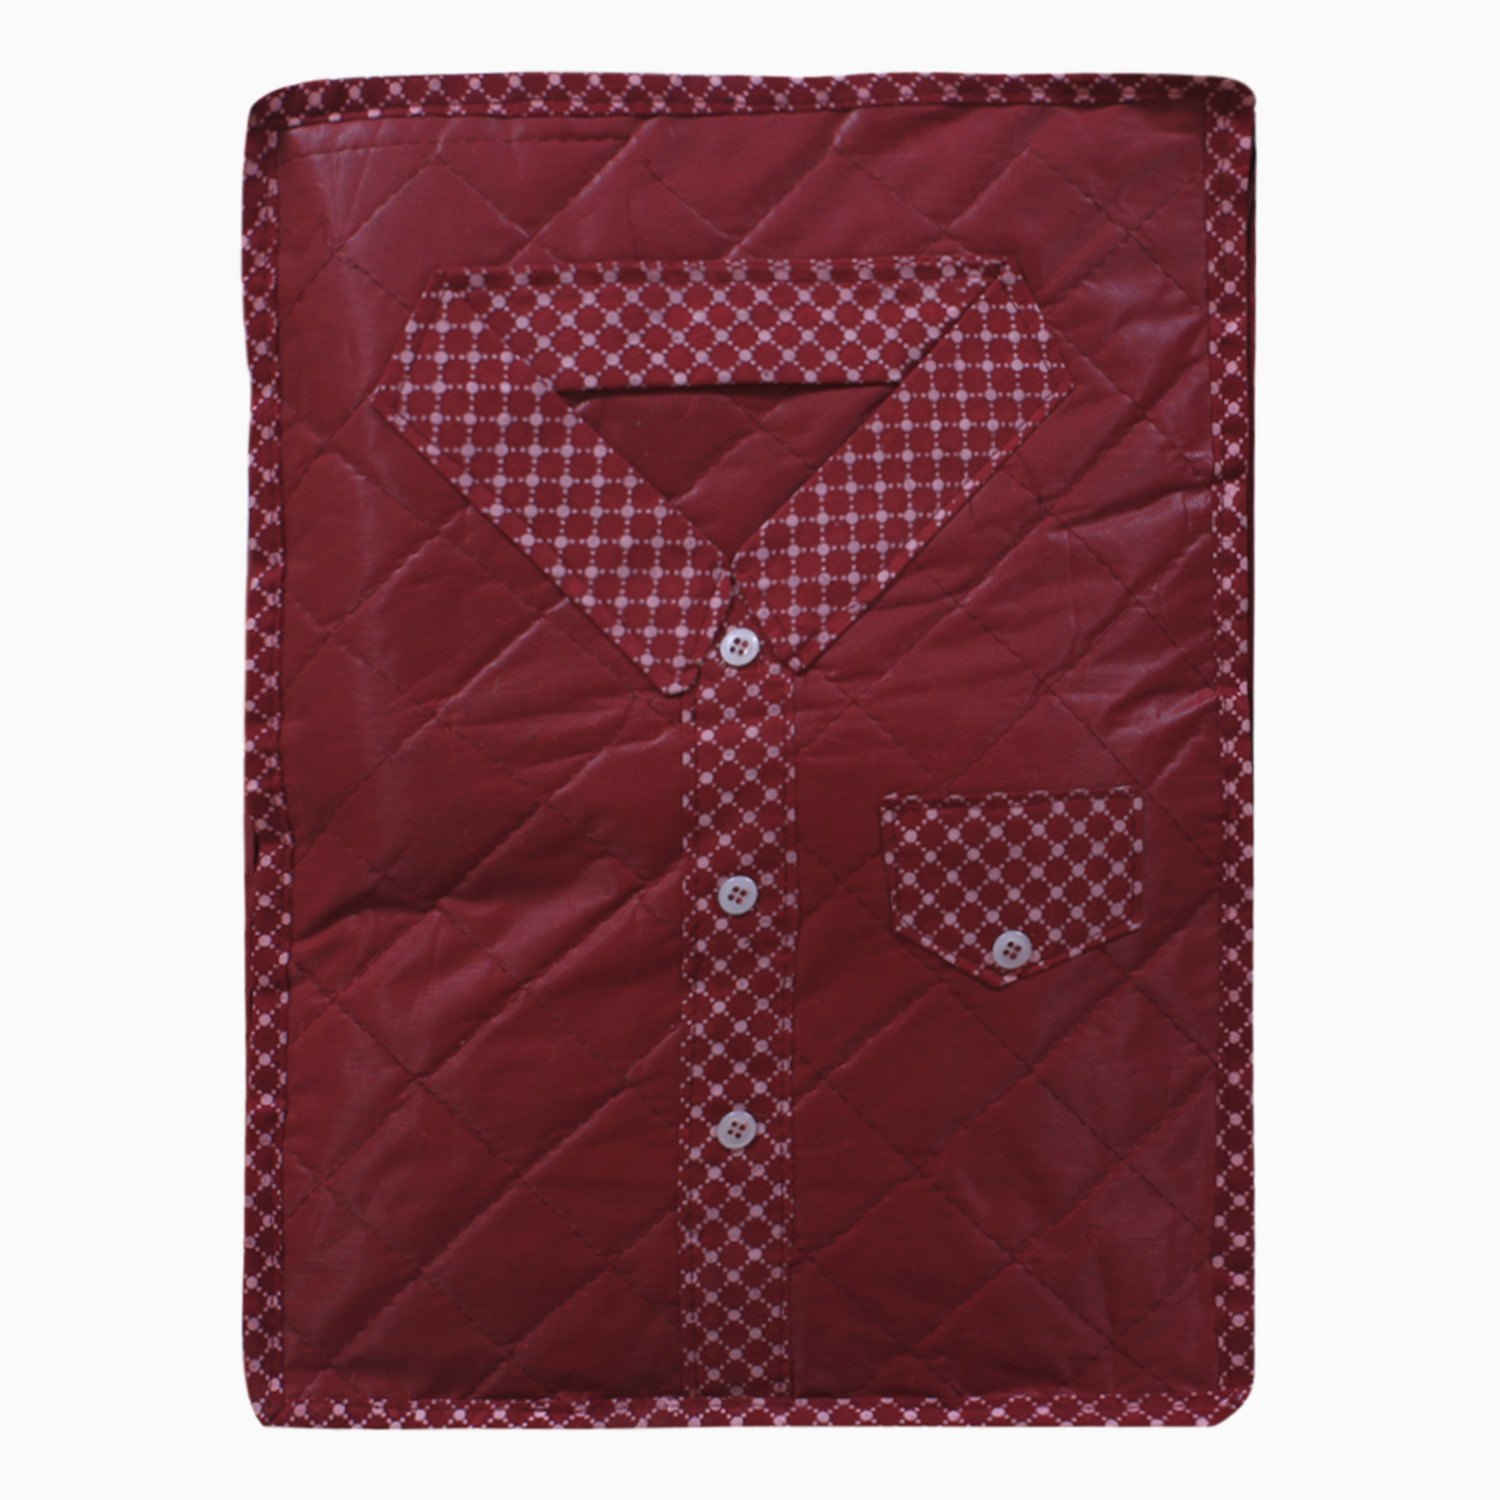 Kuber Industries Dot Print Parachute Shirt Cover/Clothing Organizer/Wardrobe Organizer With Window For Home, Traveling (Maroon)